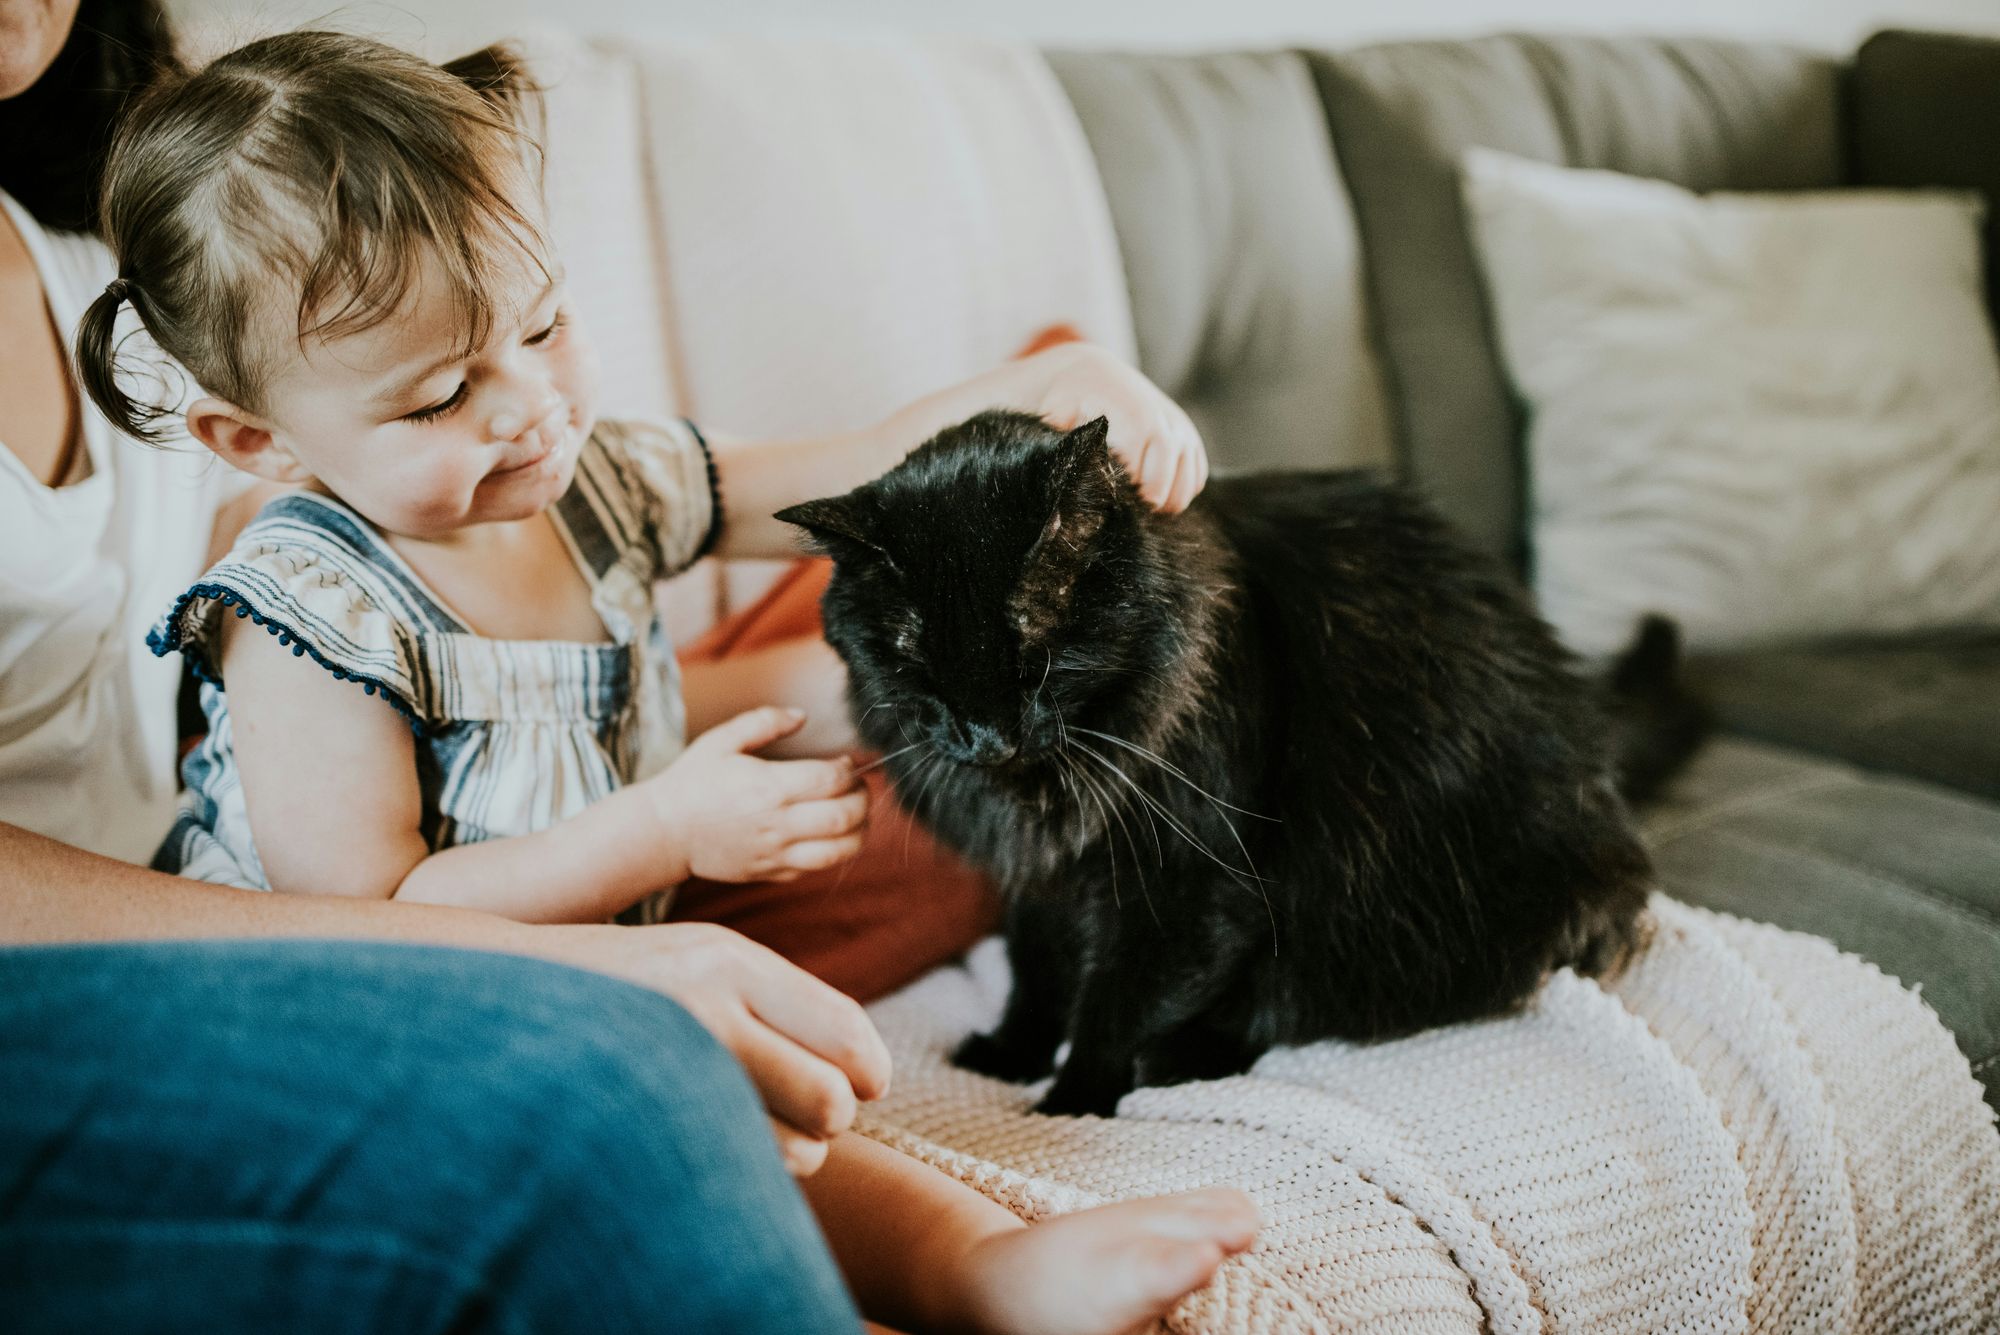 Woman in blue denim jeans sitting with toddler on sofa beside long-haired black cat